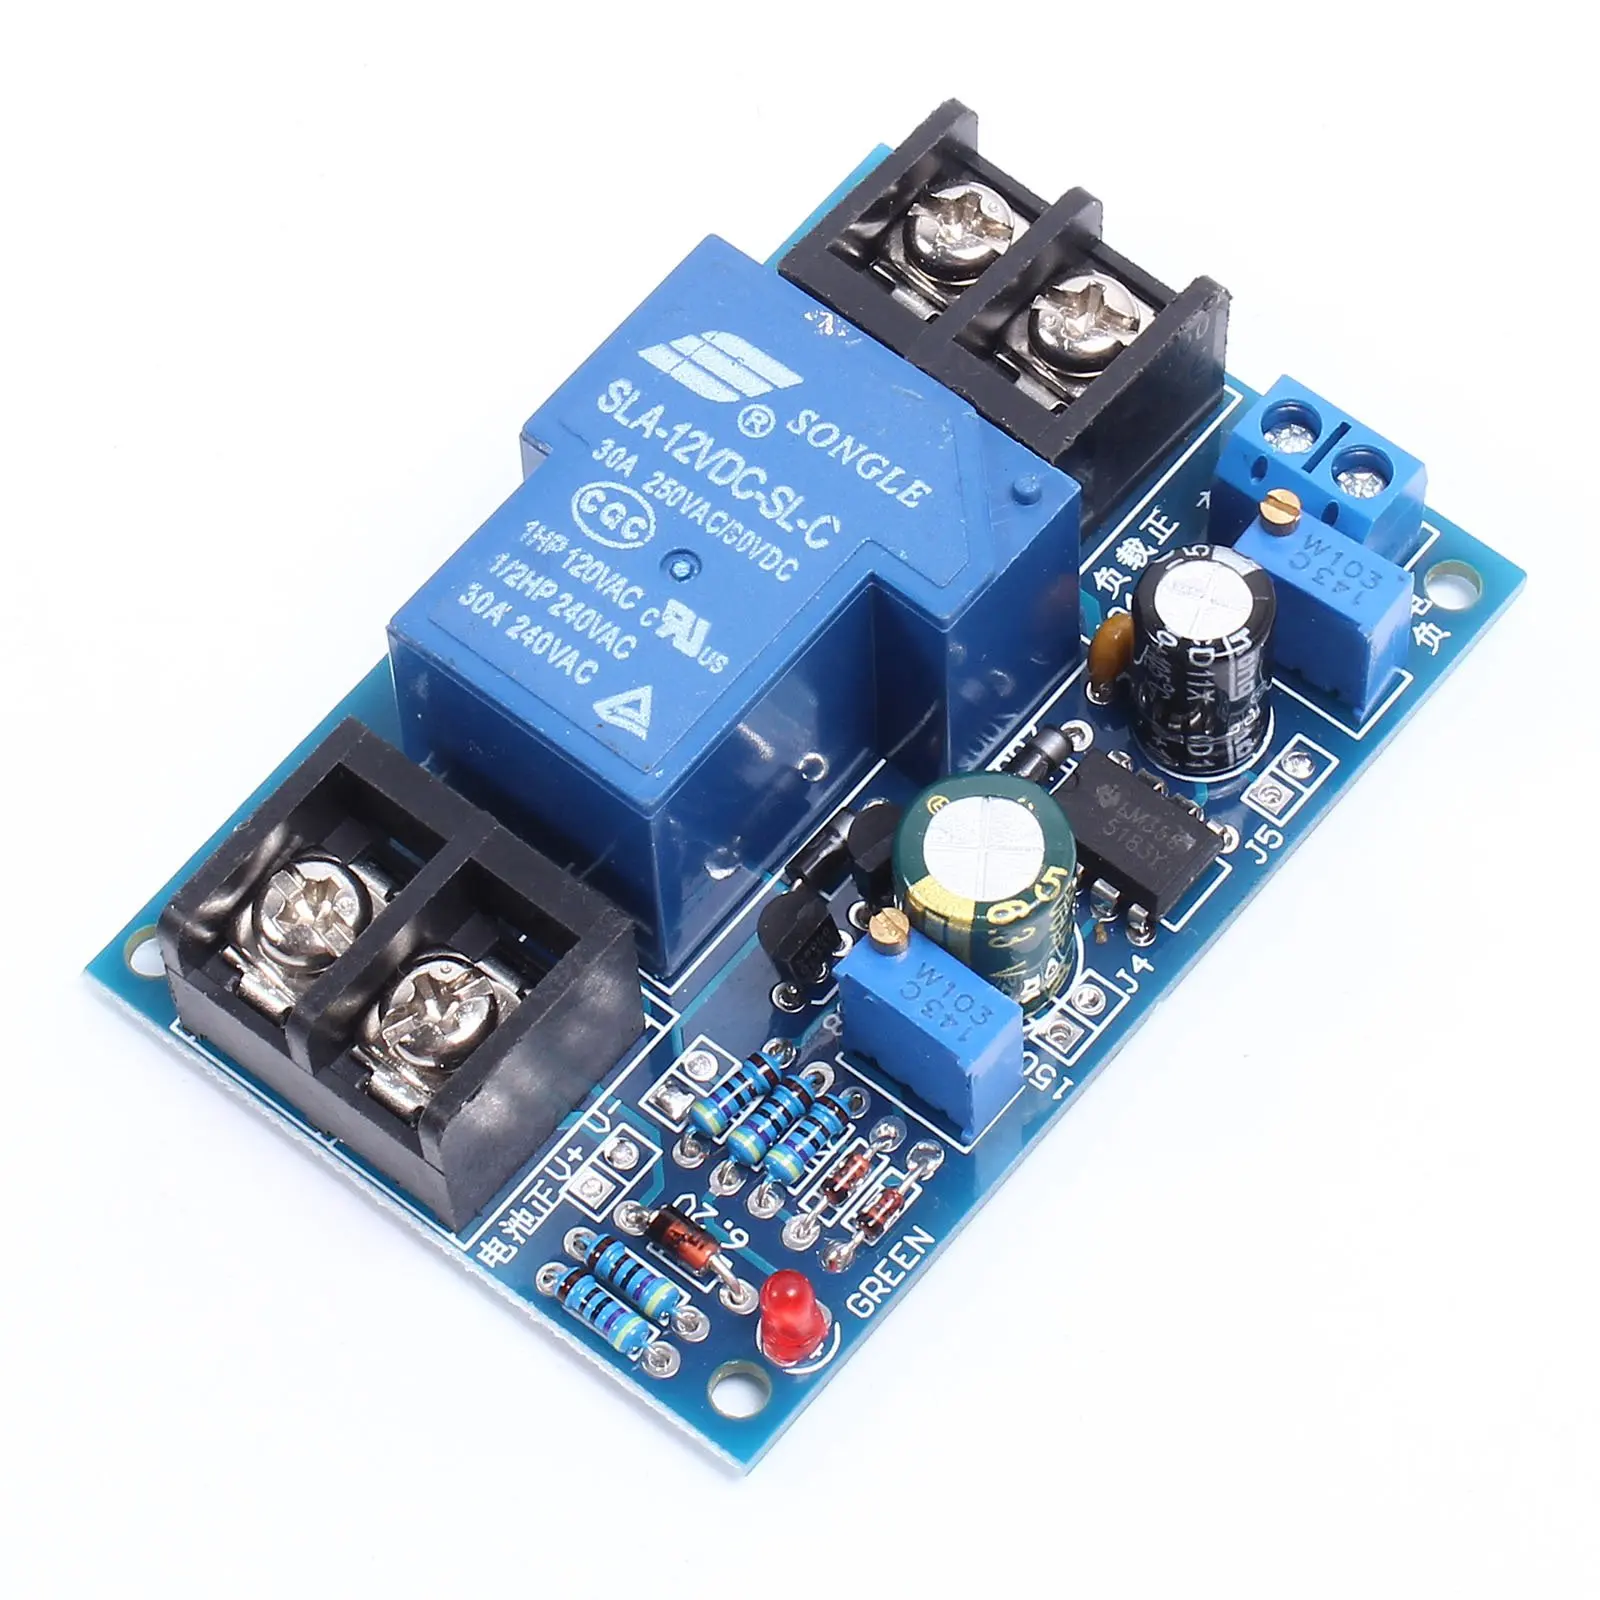 IS Digital Low Voltage Protector Disconnect Switch Over Discharge Protection Module for 12-34V Lead Acid Lithium Battery